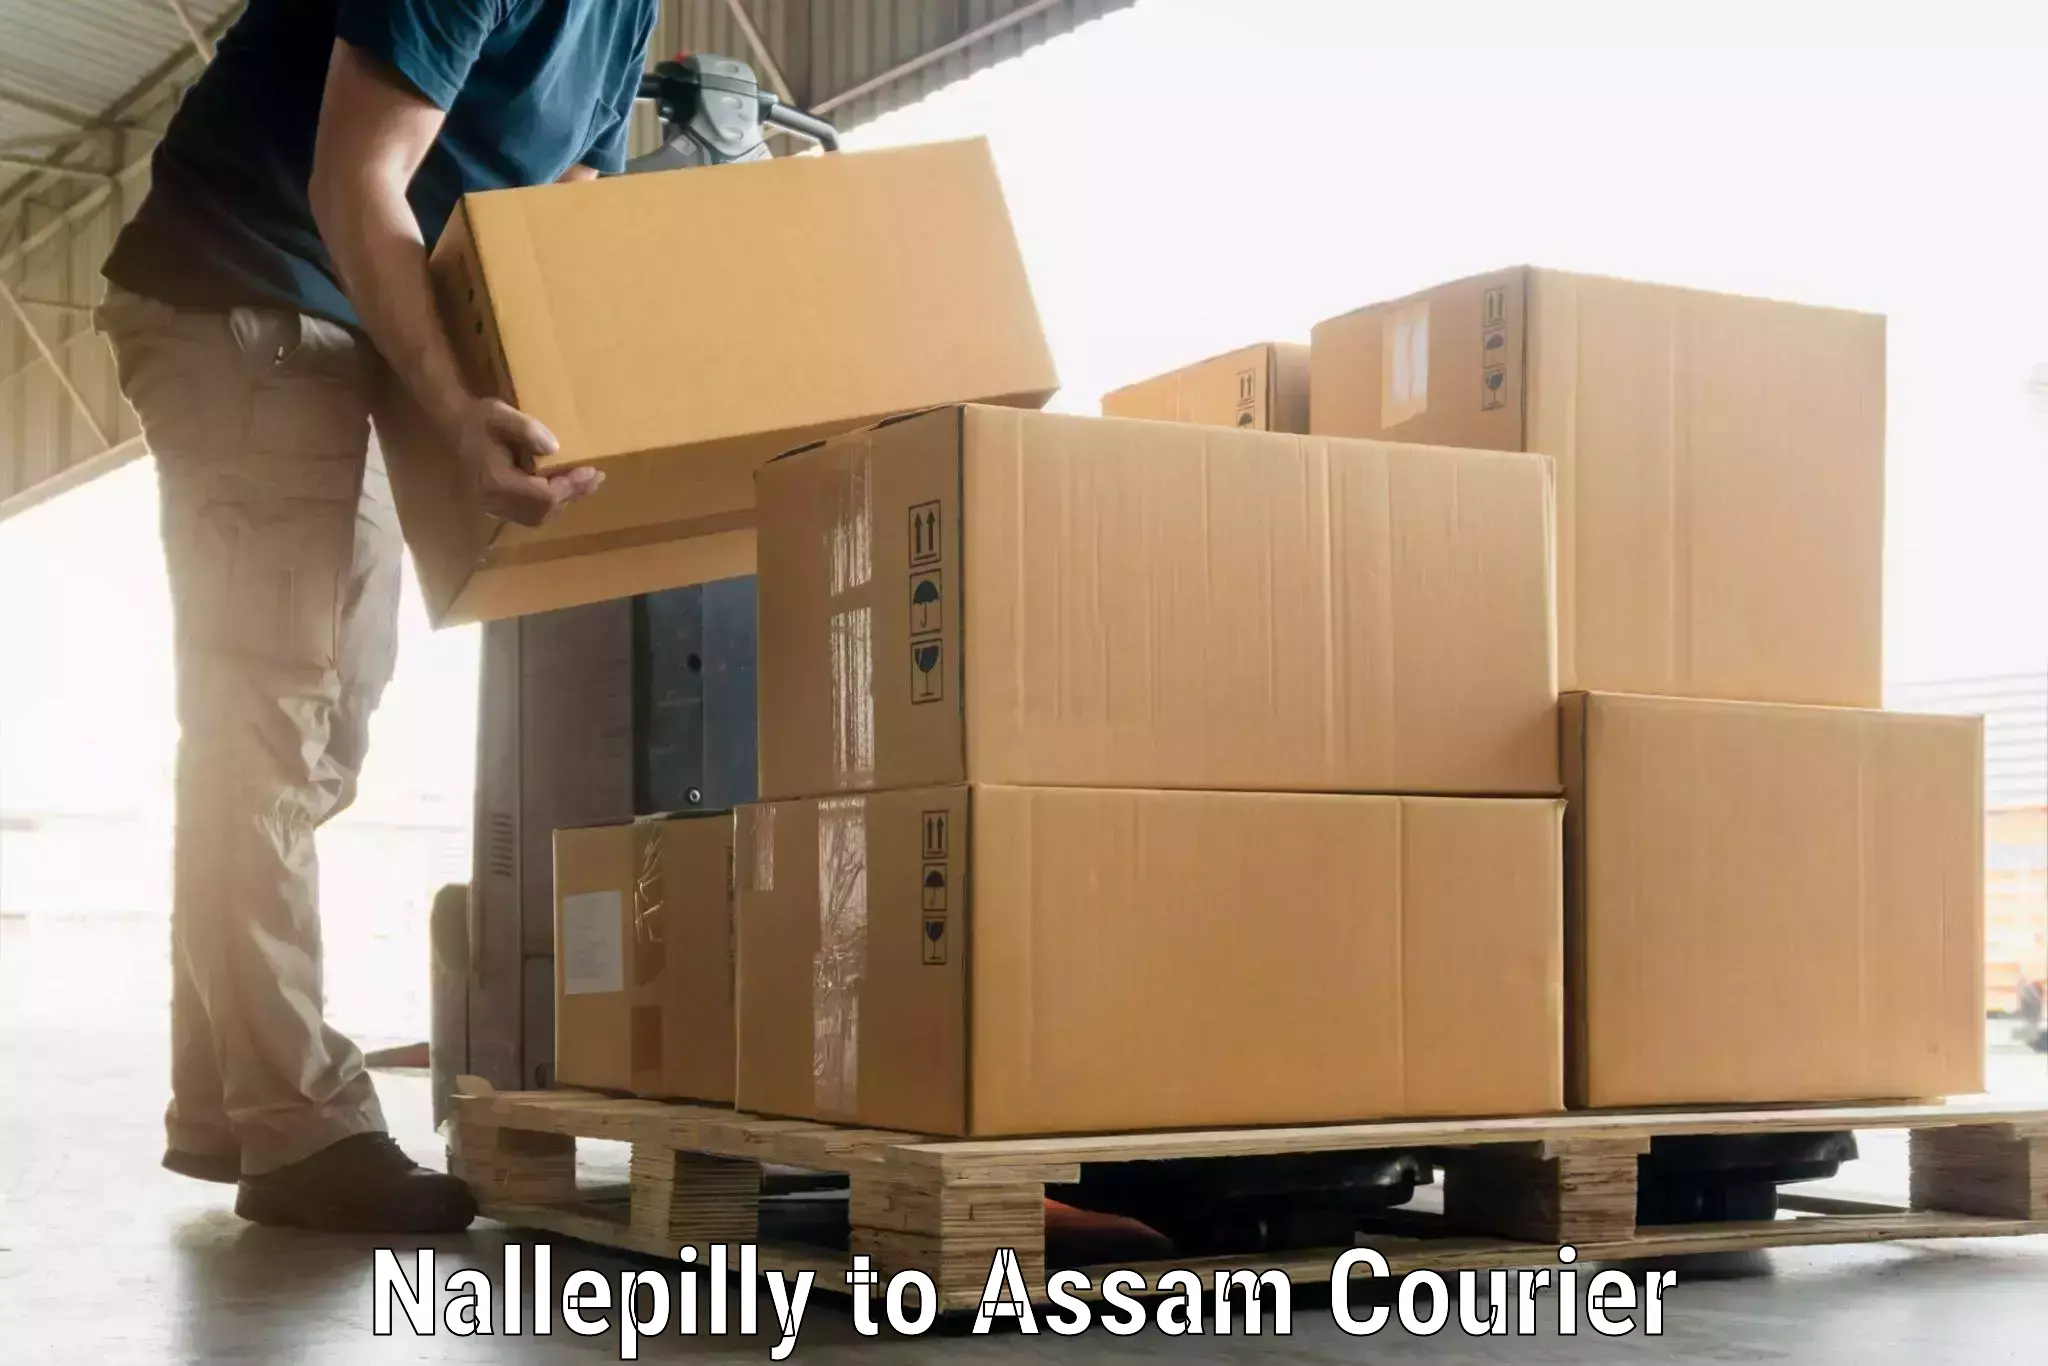 Luggage transport consultancy Nallepilly to Assam